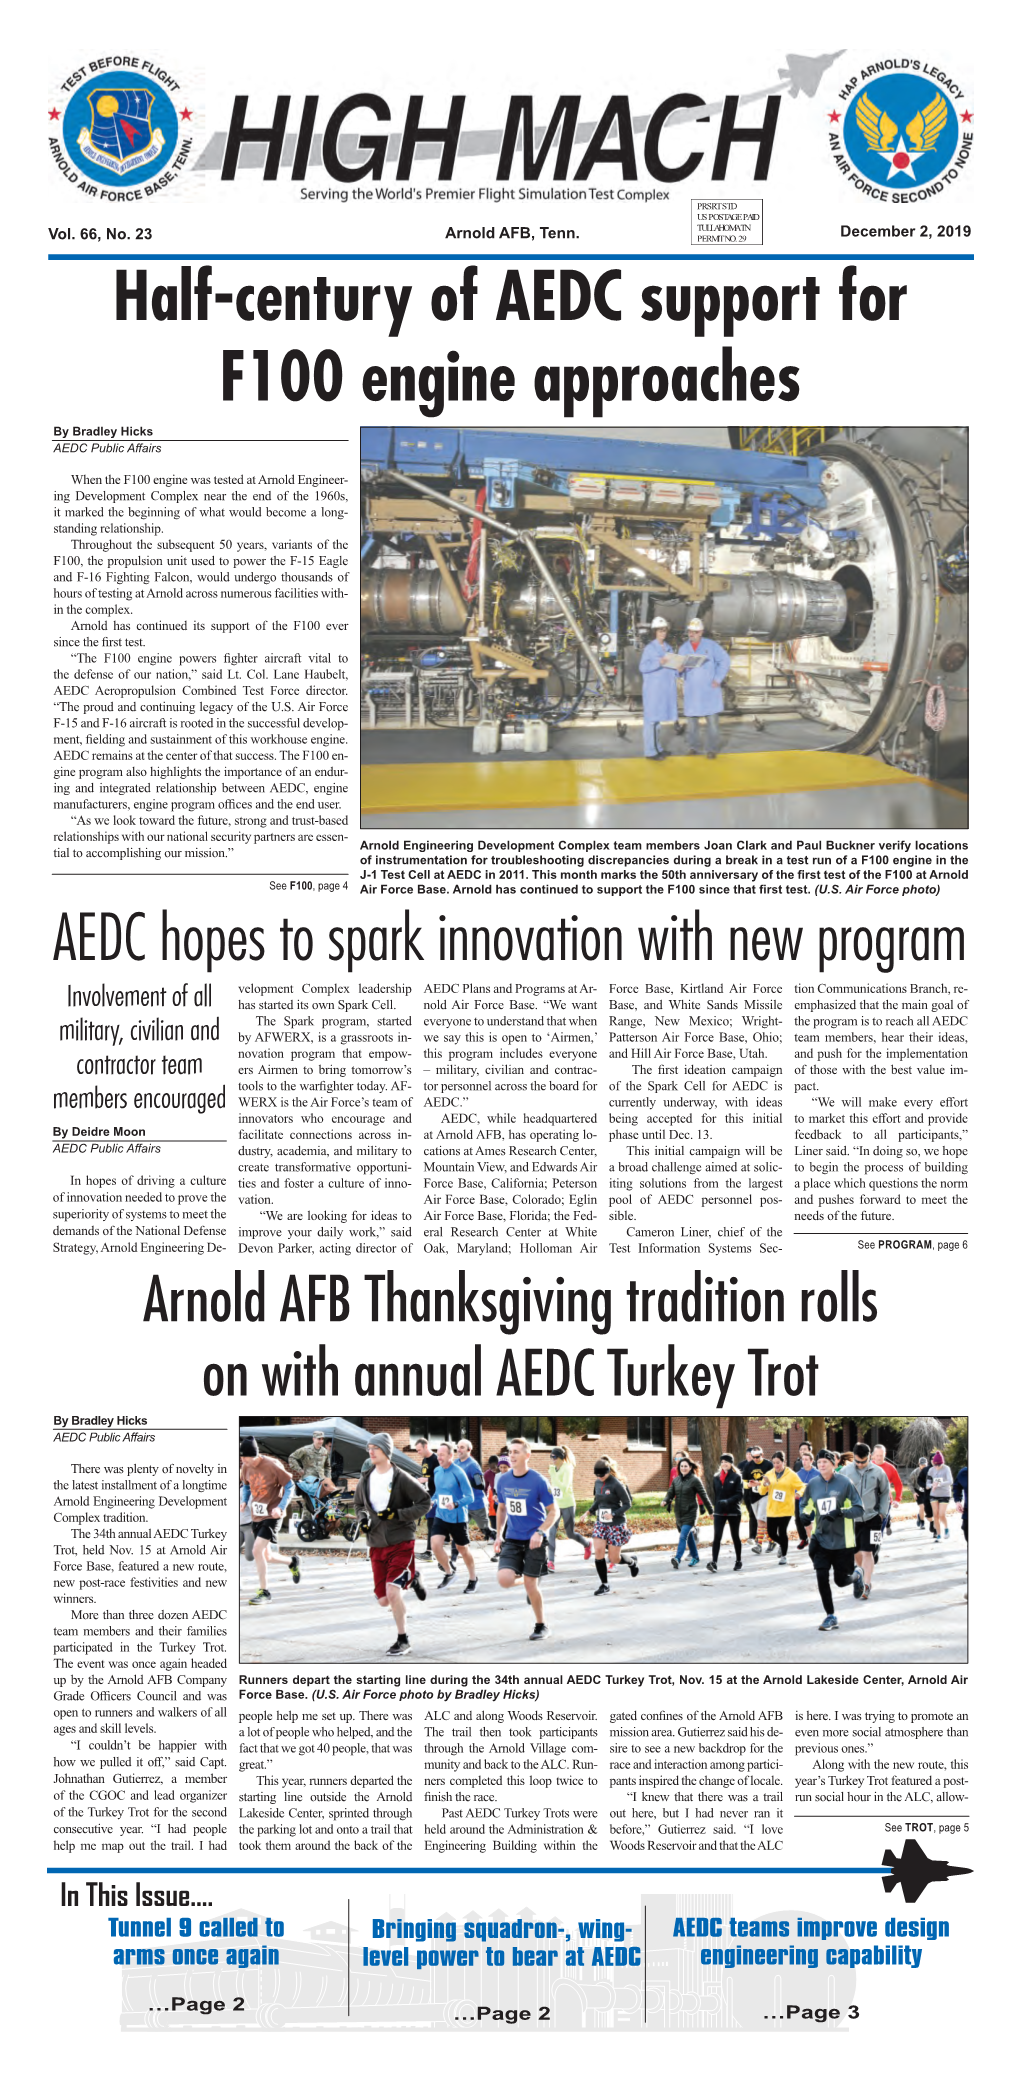 Half-Century of AEDC Support for F100 Engine Approaches by Bradley Hicks AEDC Public Affairs